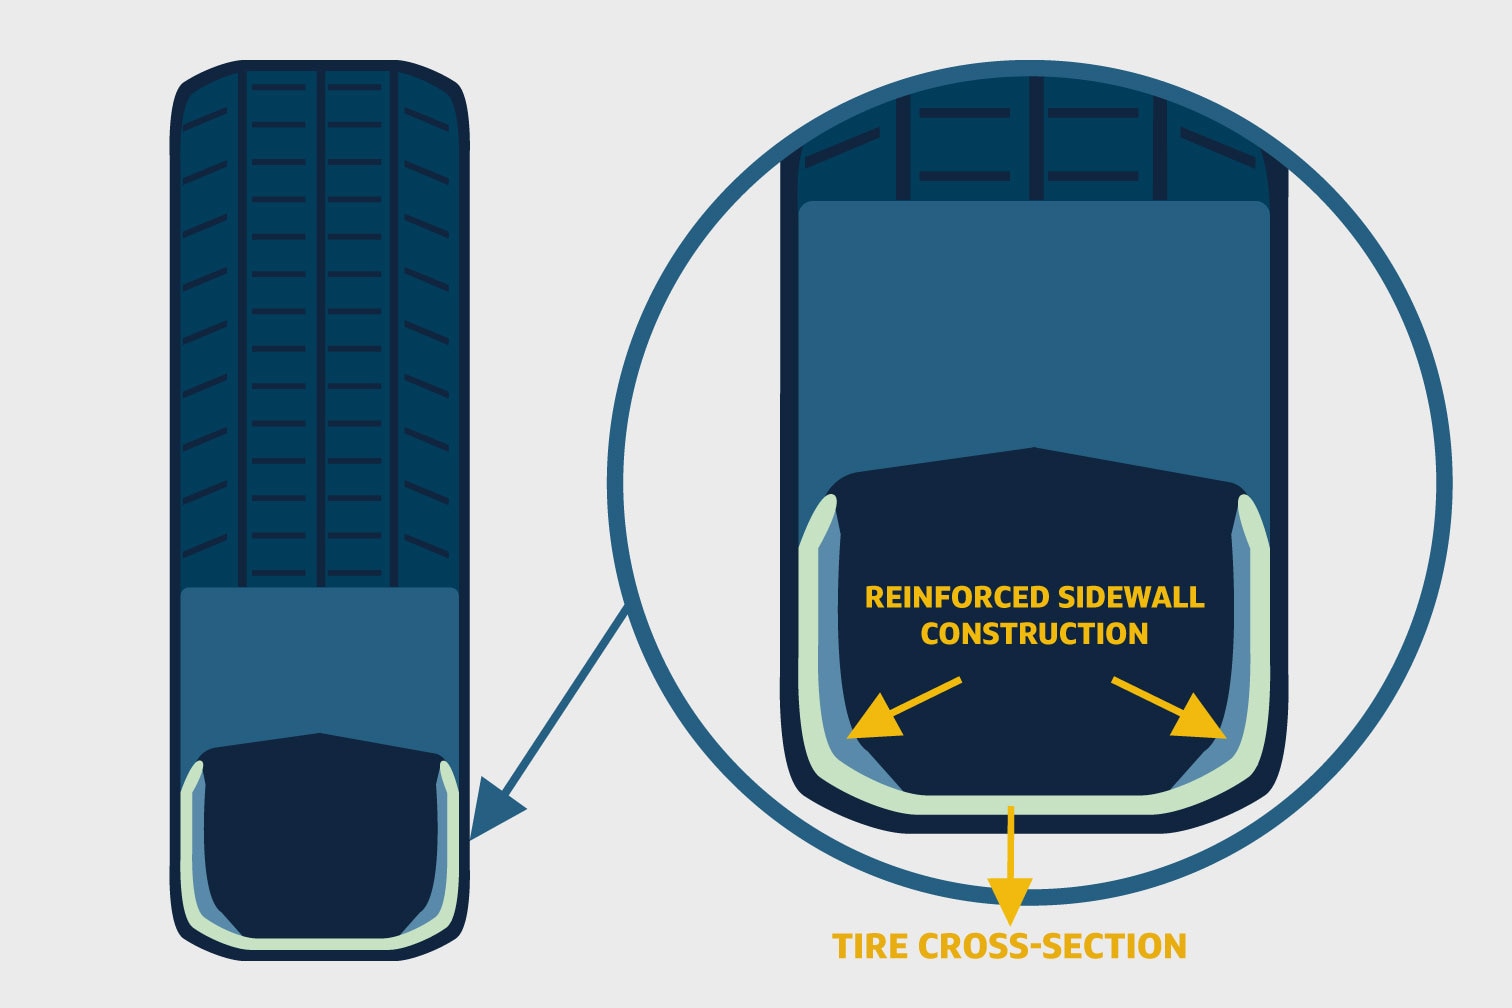 Internal illustration graphic showing run-flat tire, reinforced sidewall construction undefined tire-cross section